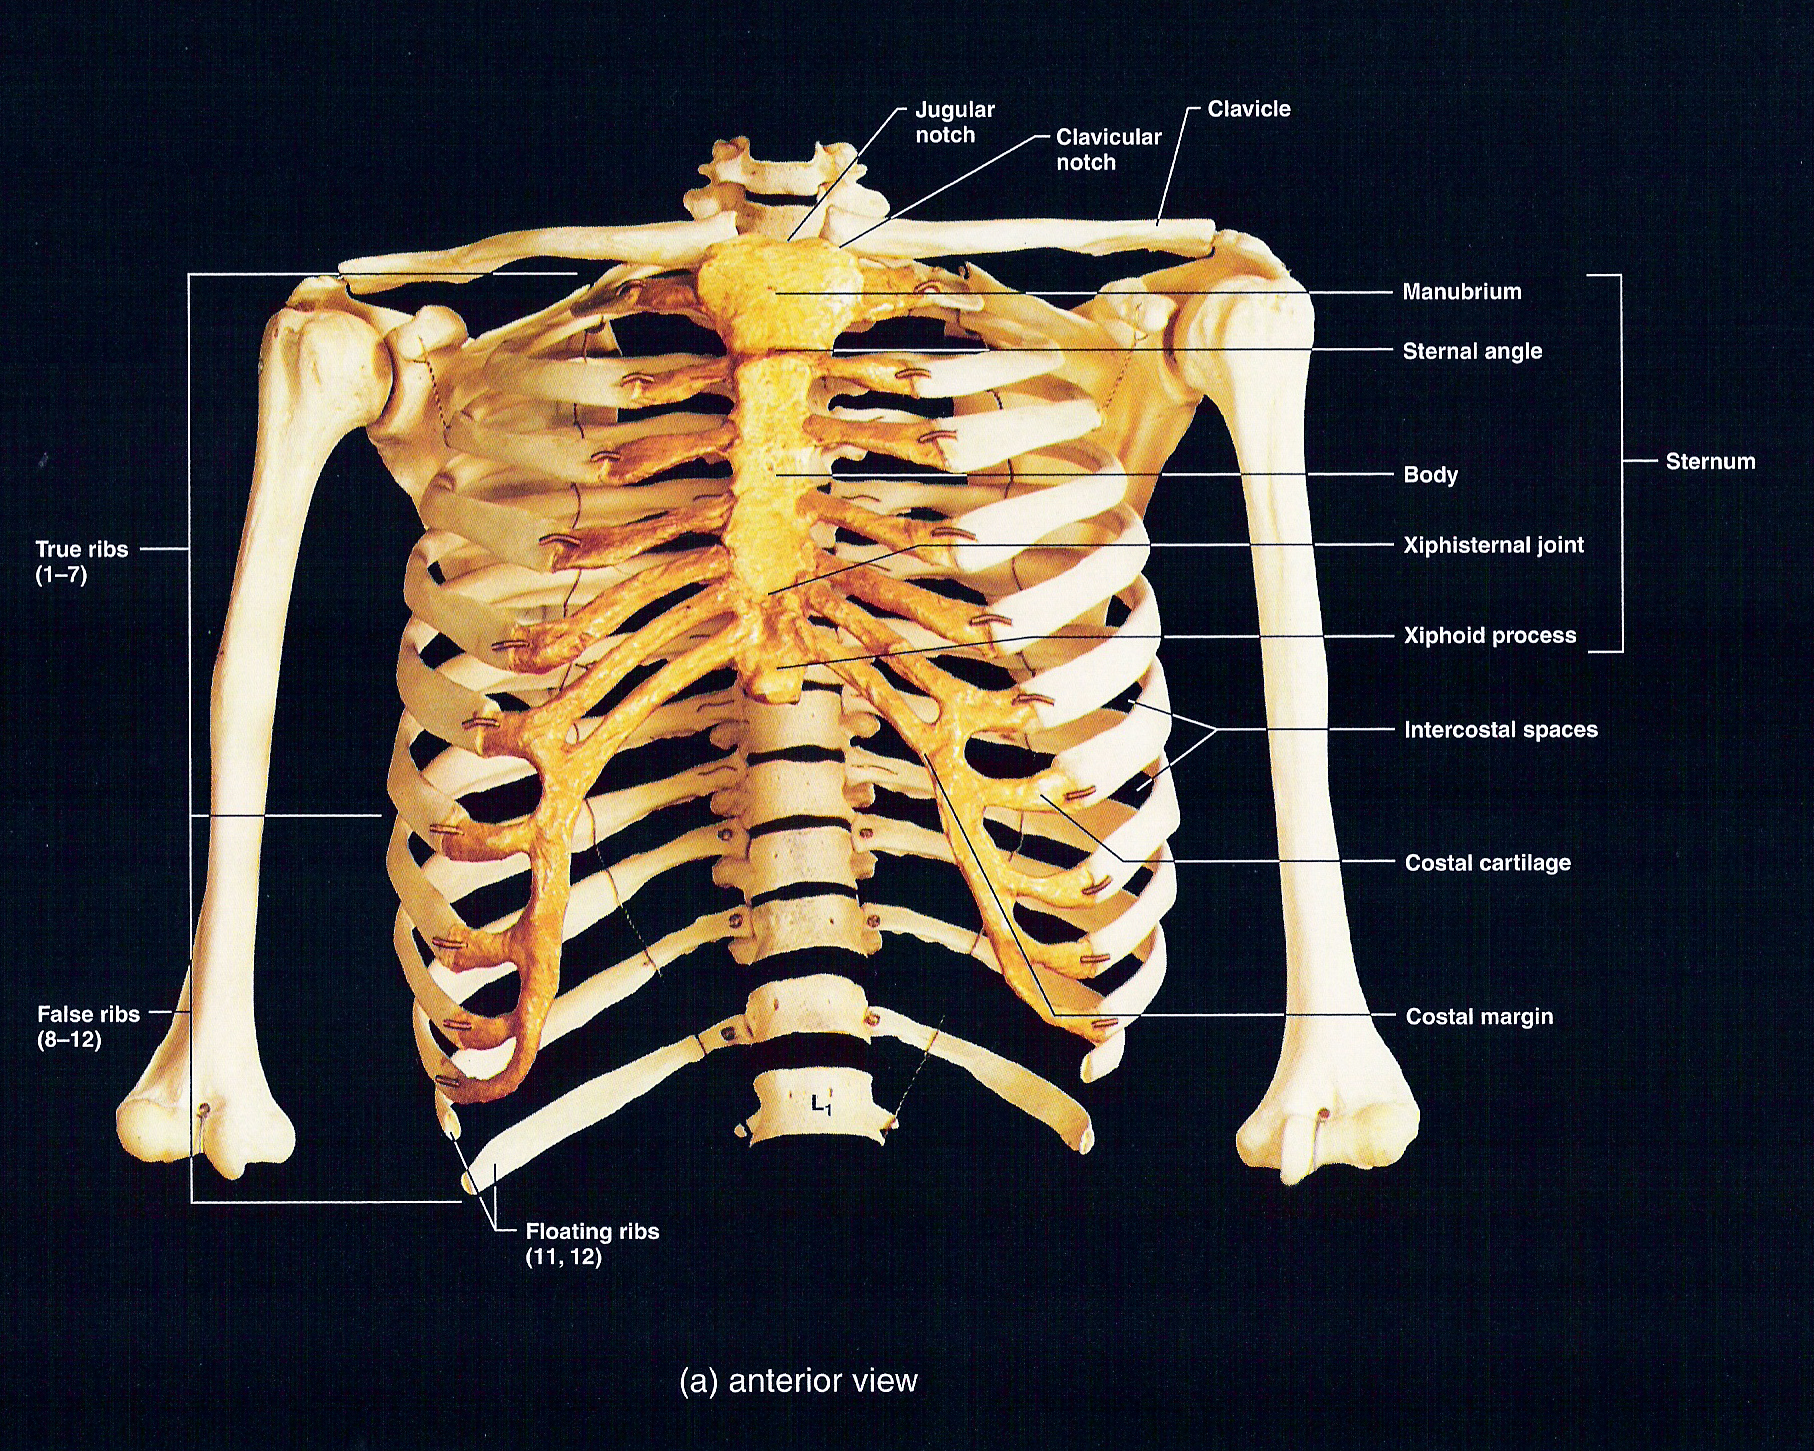 Thorax Anterior View Of Human Body Biology Forums Gallery Rib Cage Images And Photos Finder